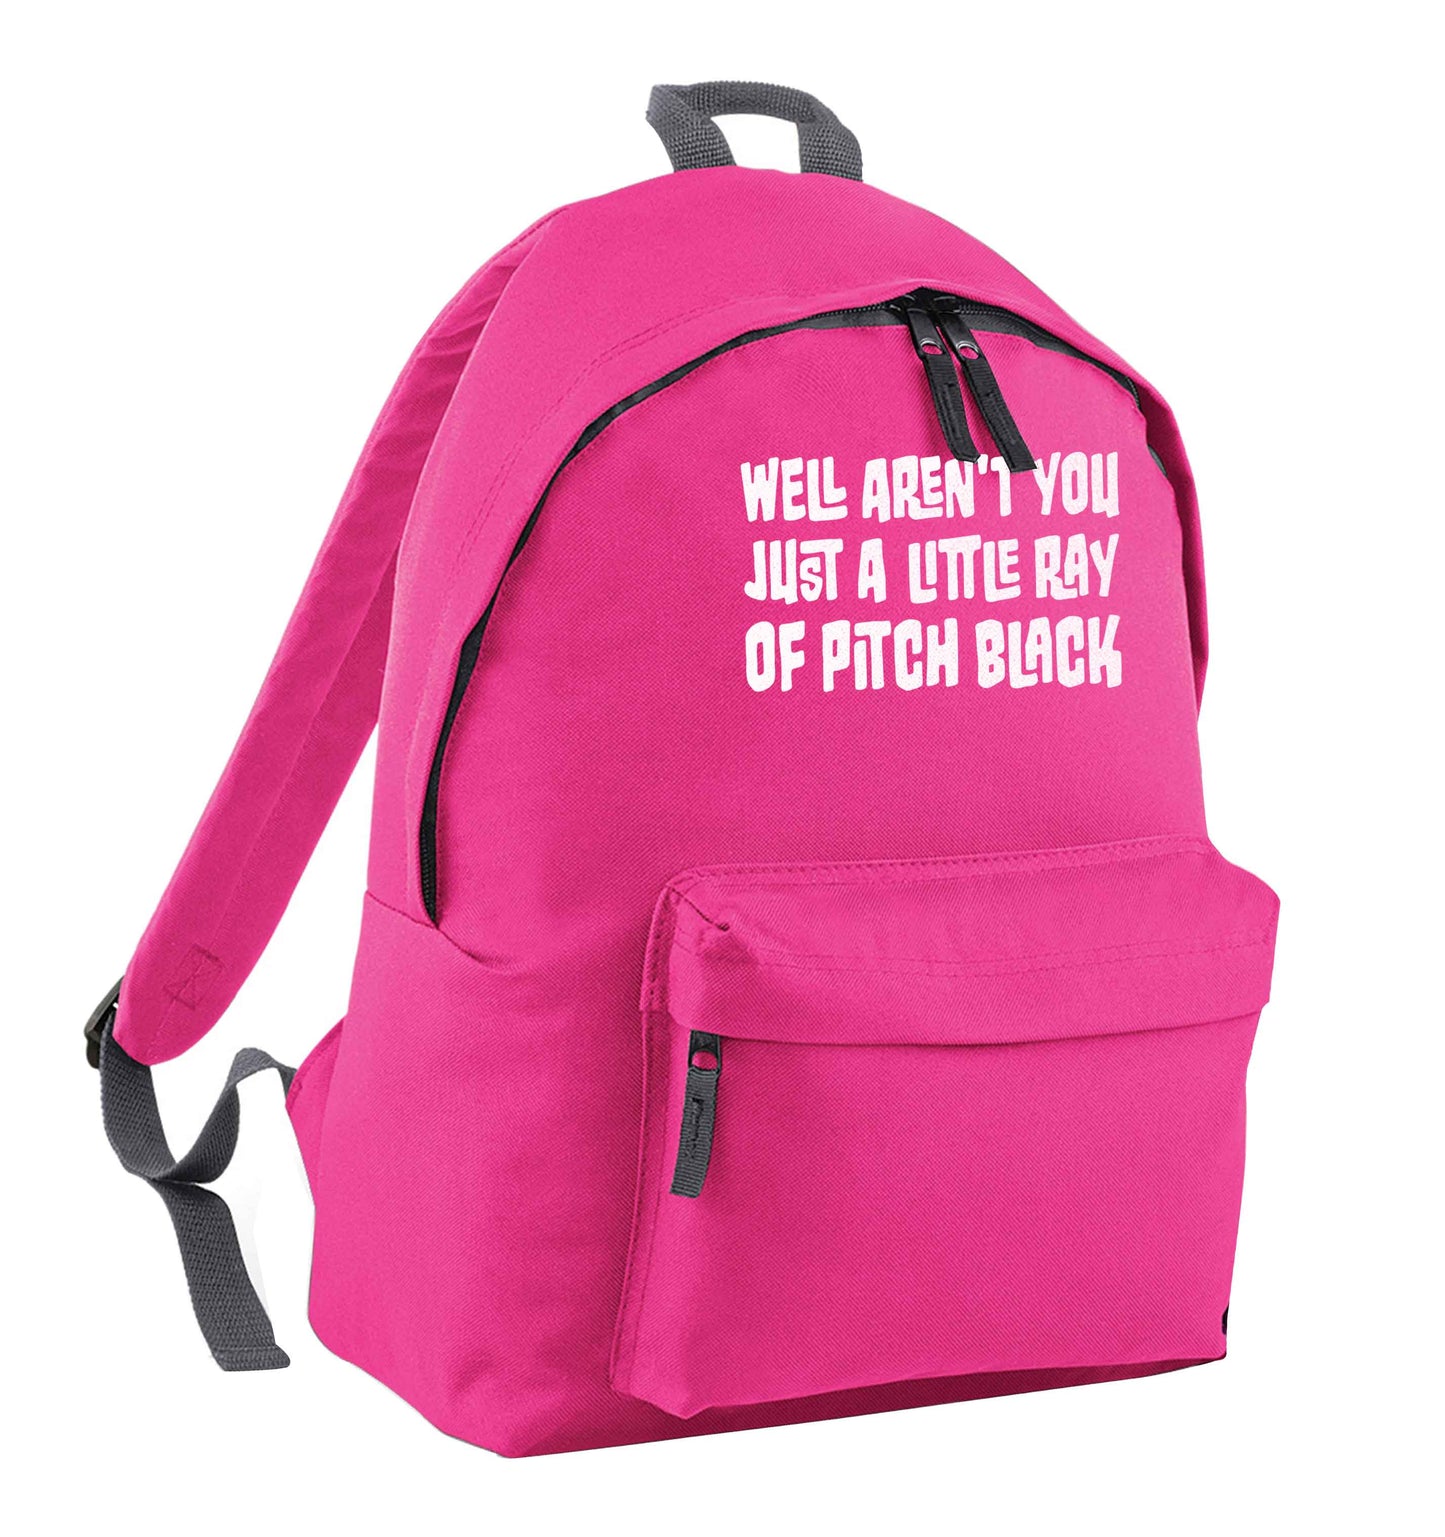 Well aren't you just a little ray of pitch black Kit pink adults backpack